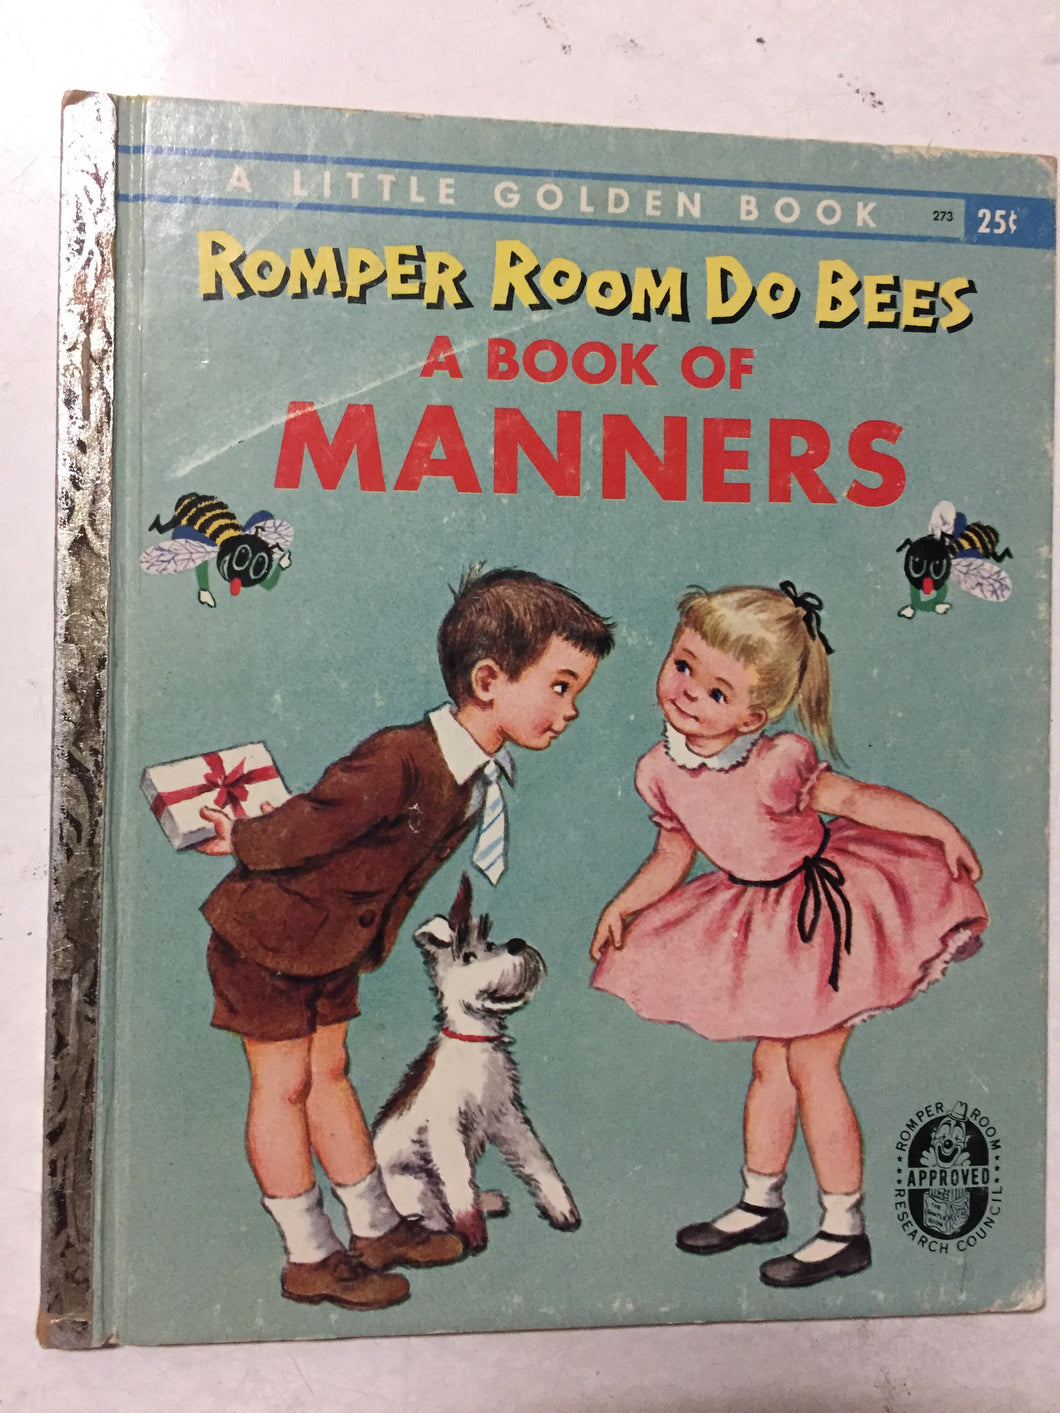 Romper Room Do Bees A Book of Manners - Slickcatbooks